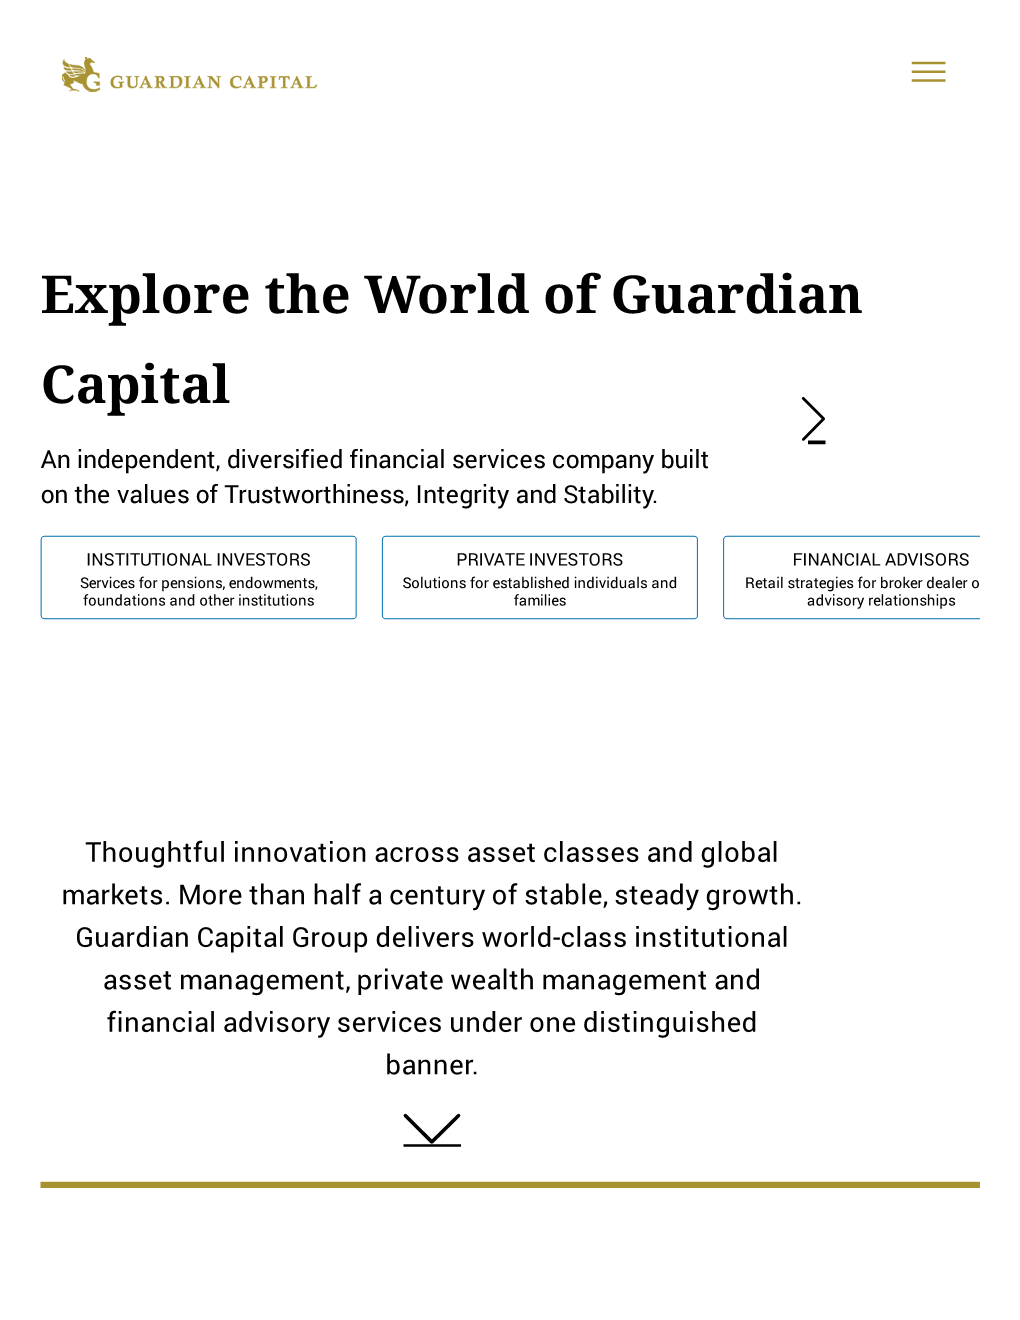 Explore the World of Guardian Capital  an Independent, Diversified Financial Services Company Built on the Values of Trustworthiness, Integrity and Stability